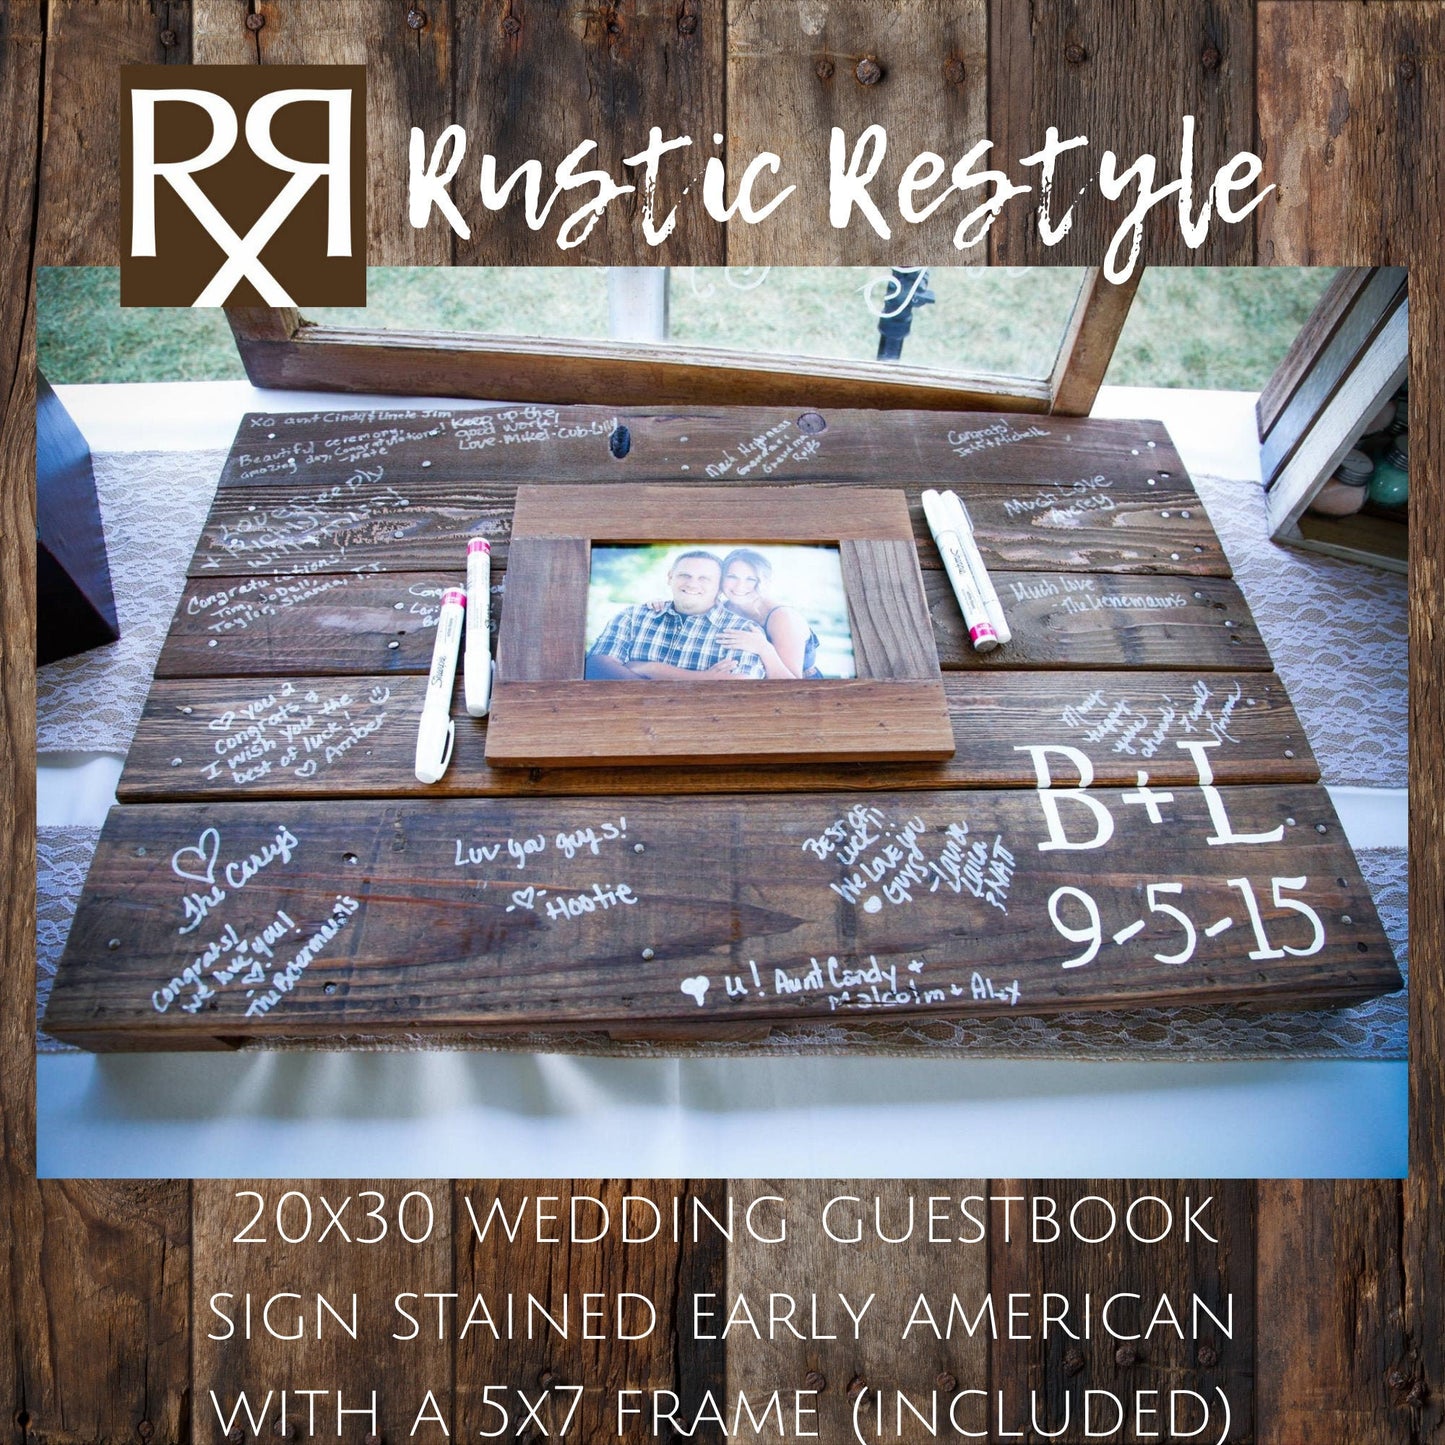 Wedding Guest Book Personalized with 9 Designs & 5 Rustic Colors - Small -  Customized Guestbook Registry Sign-in with Name - Date, Hard Cover Laser